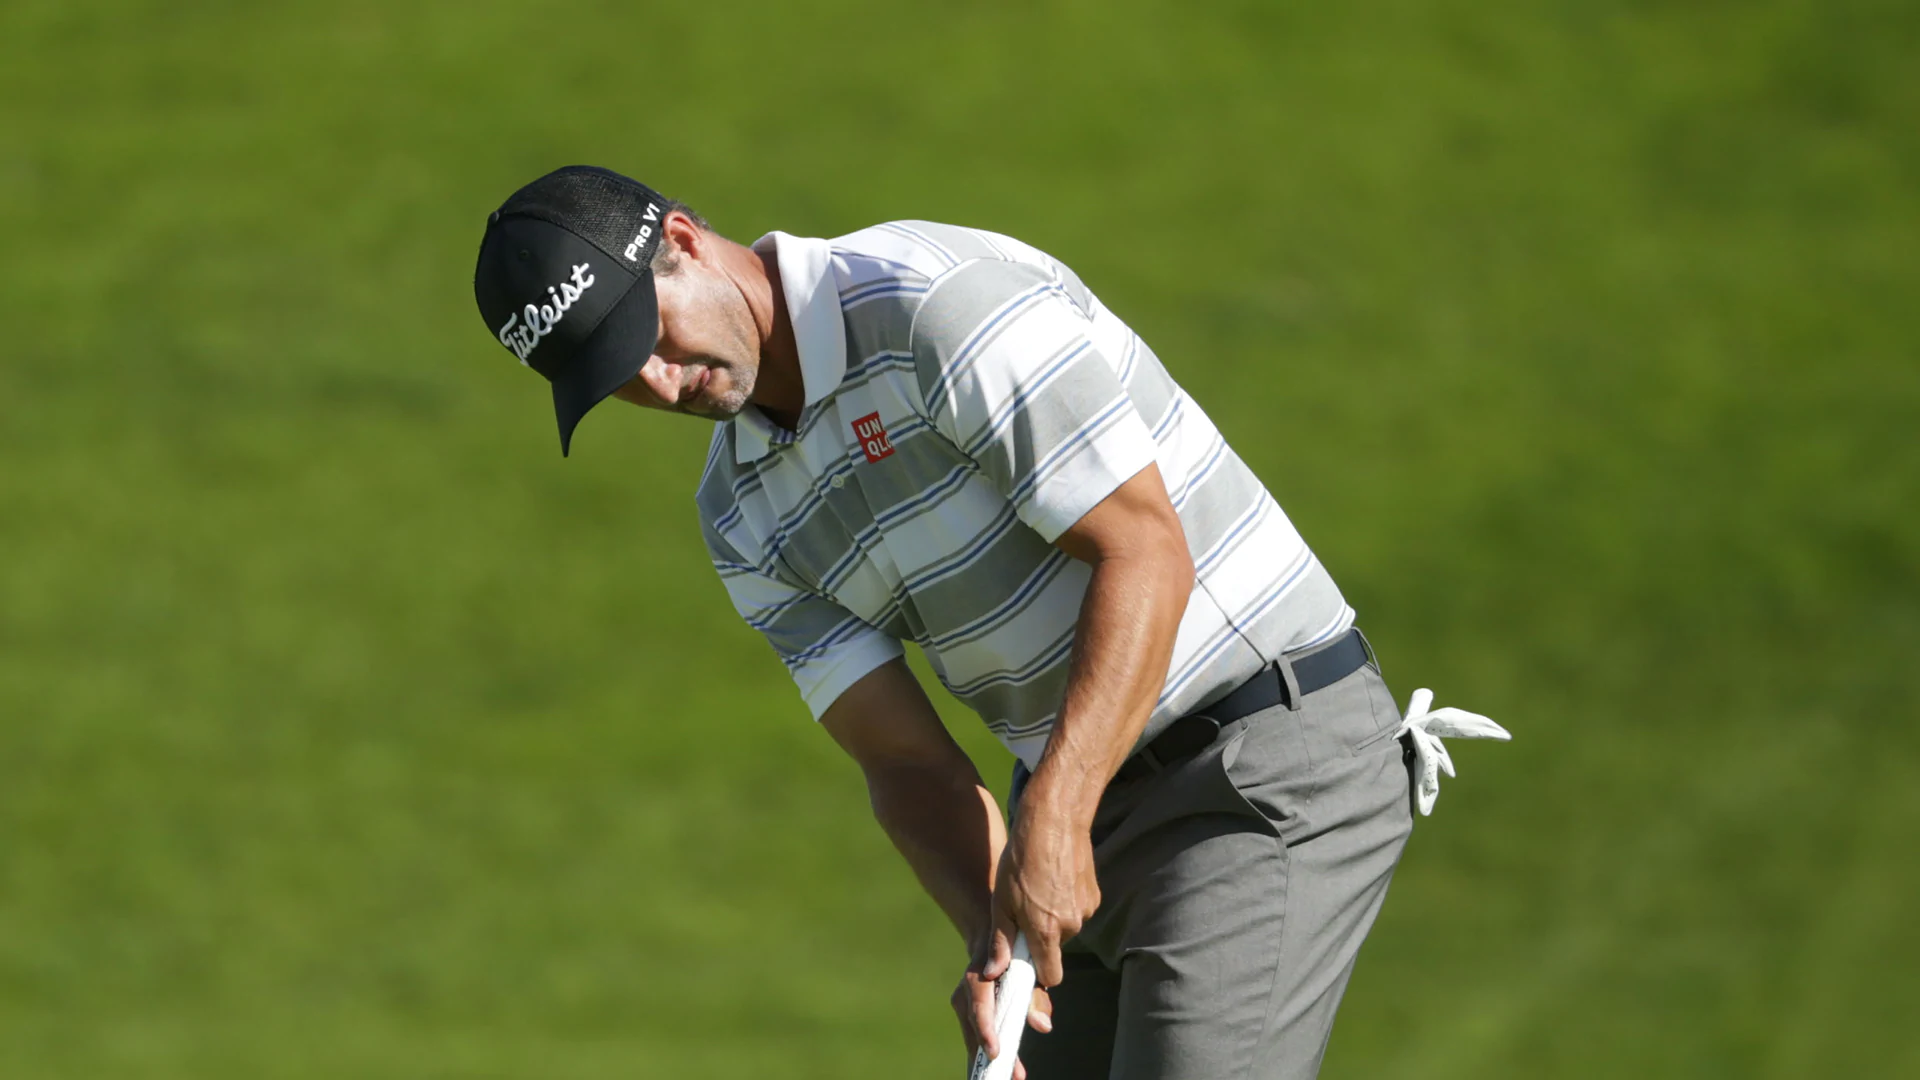 Scott gets a (new) grip, earns spot in Sunday's final group at Farmers